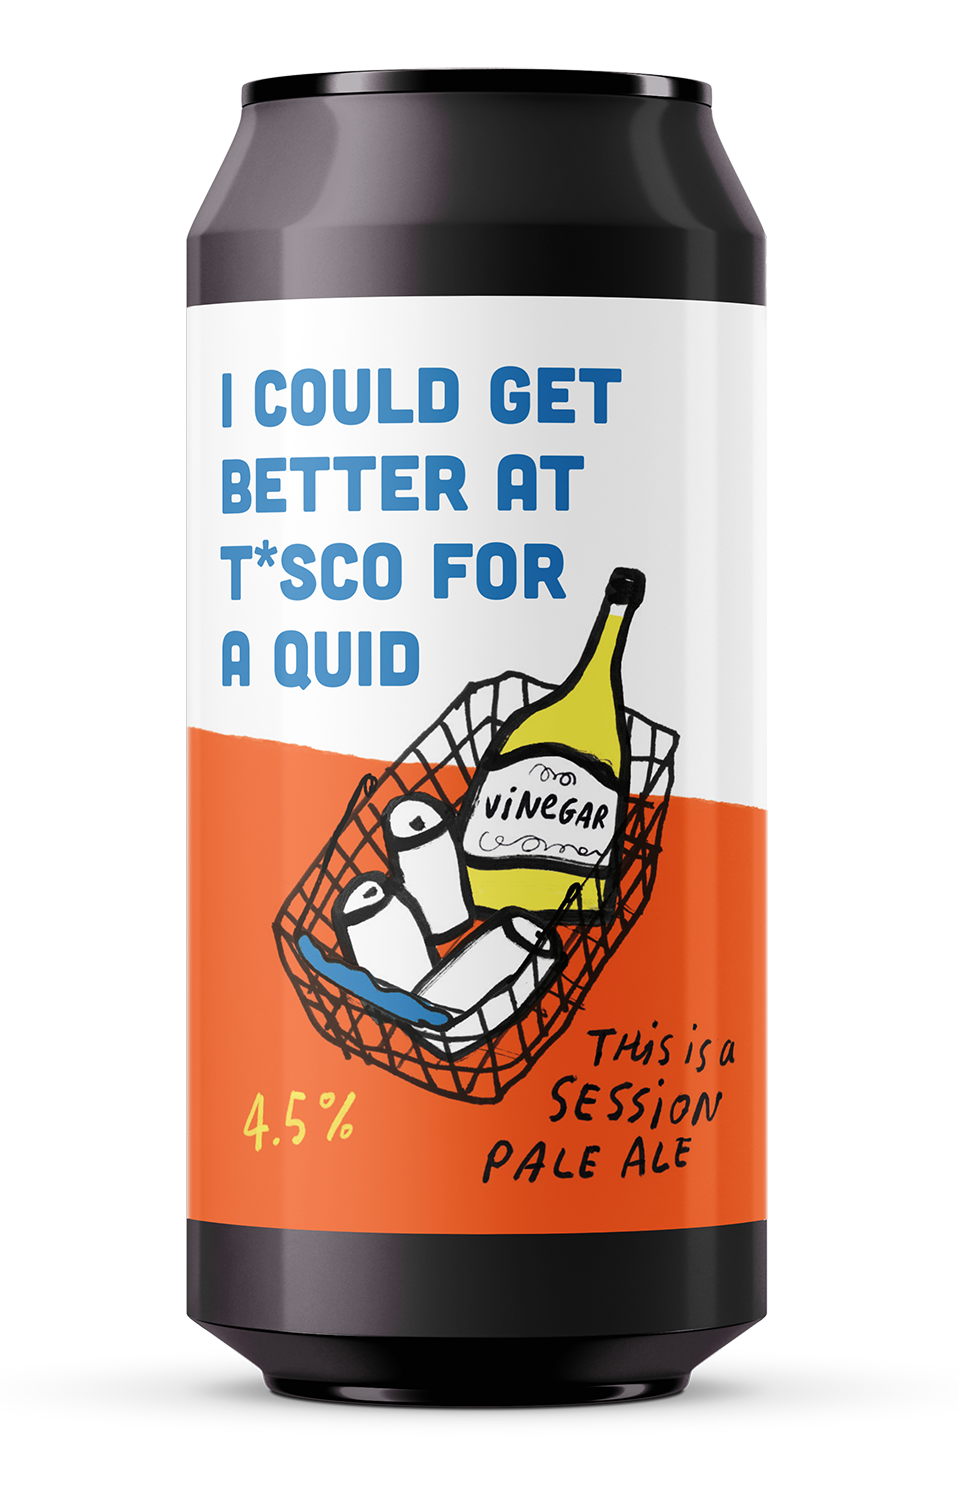 I Could Get Better In T*sco For A Quid - a Session Pale Ale (4.5%)